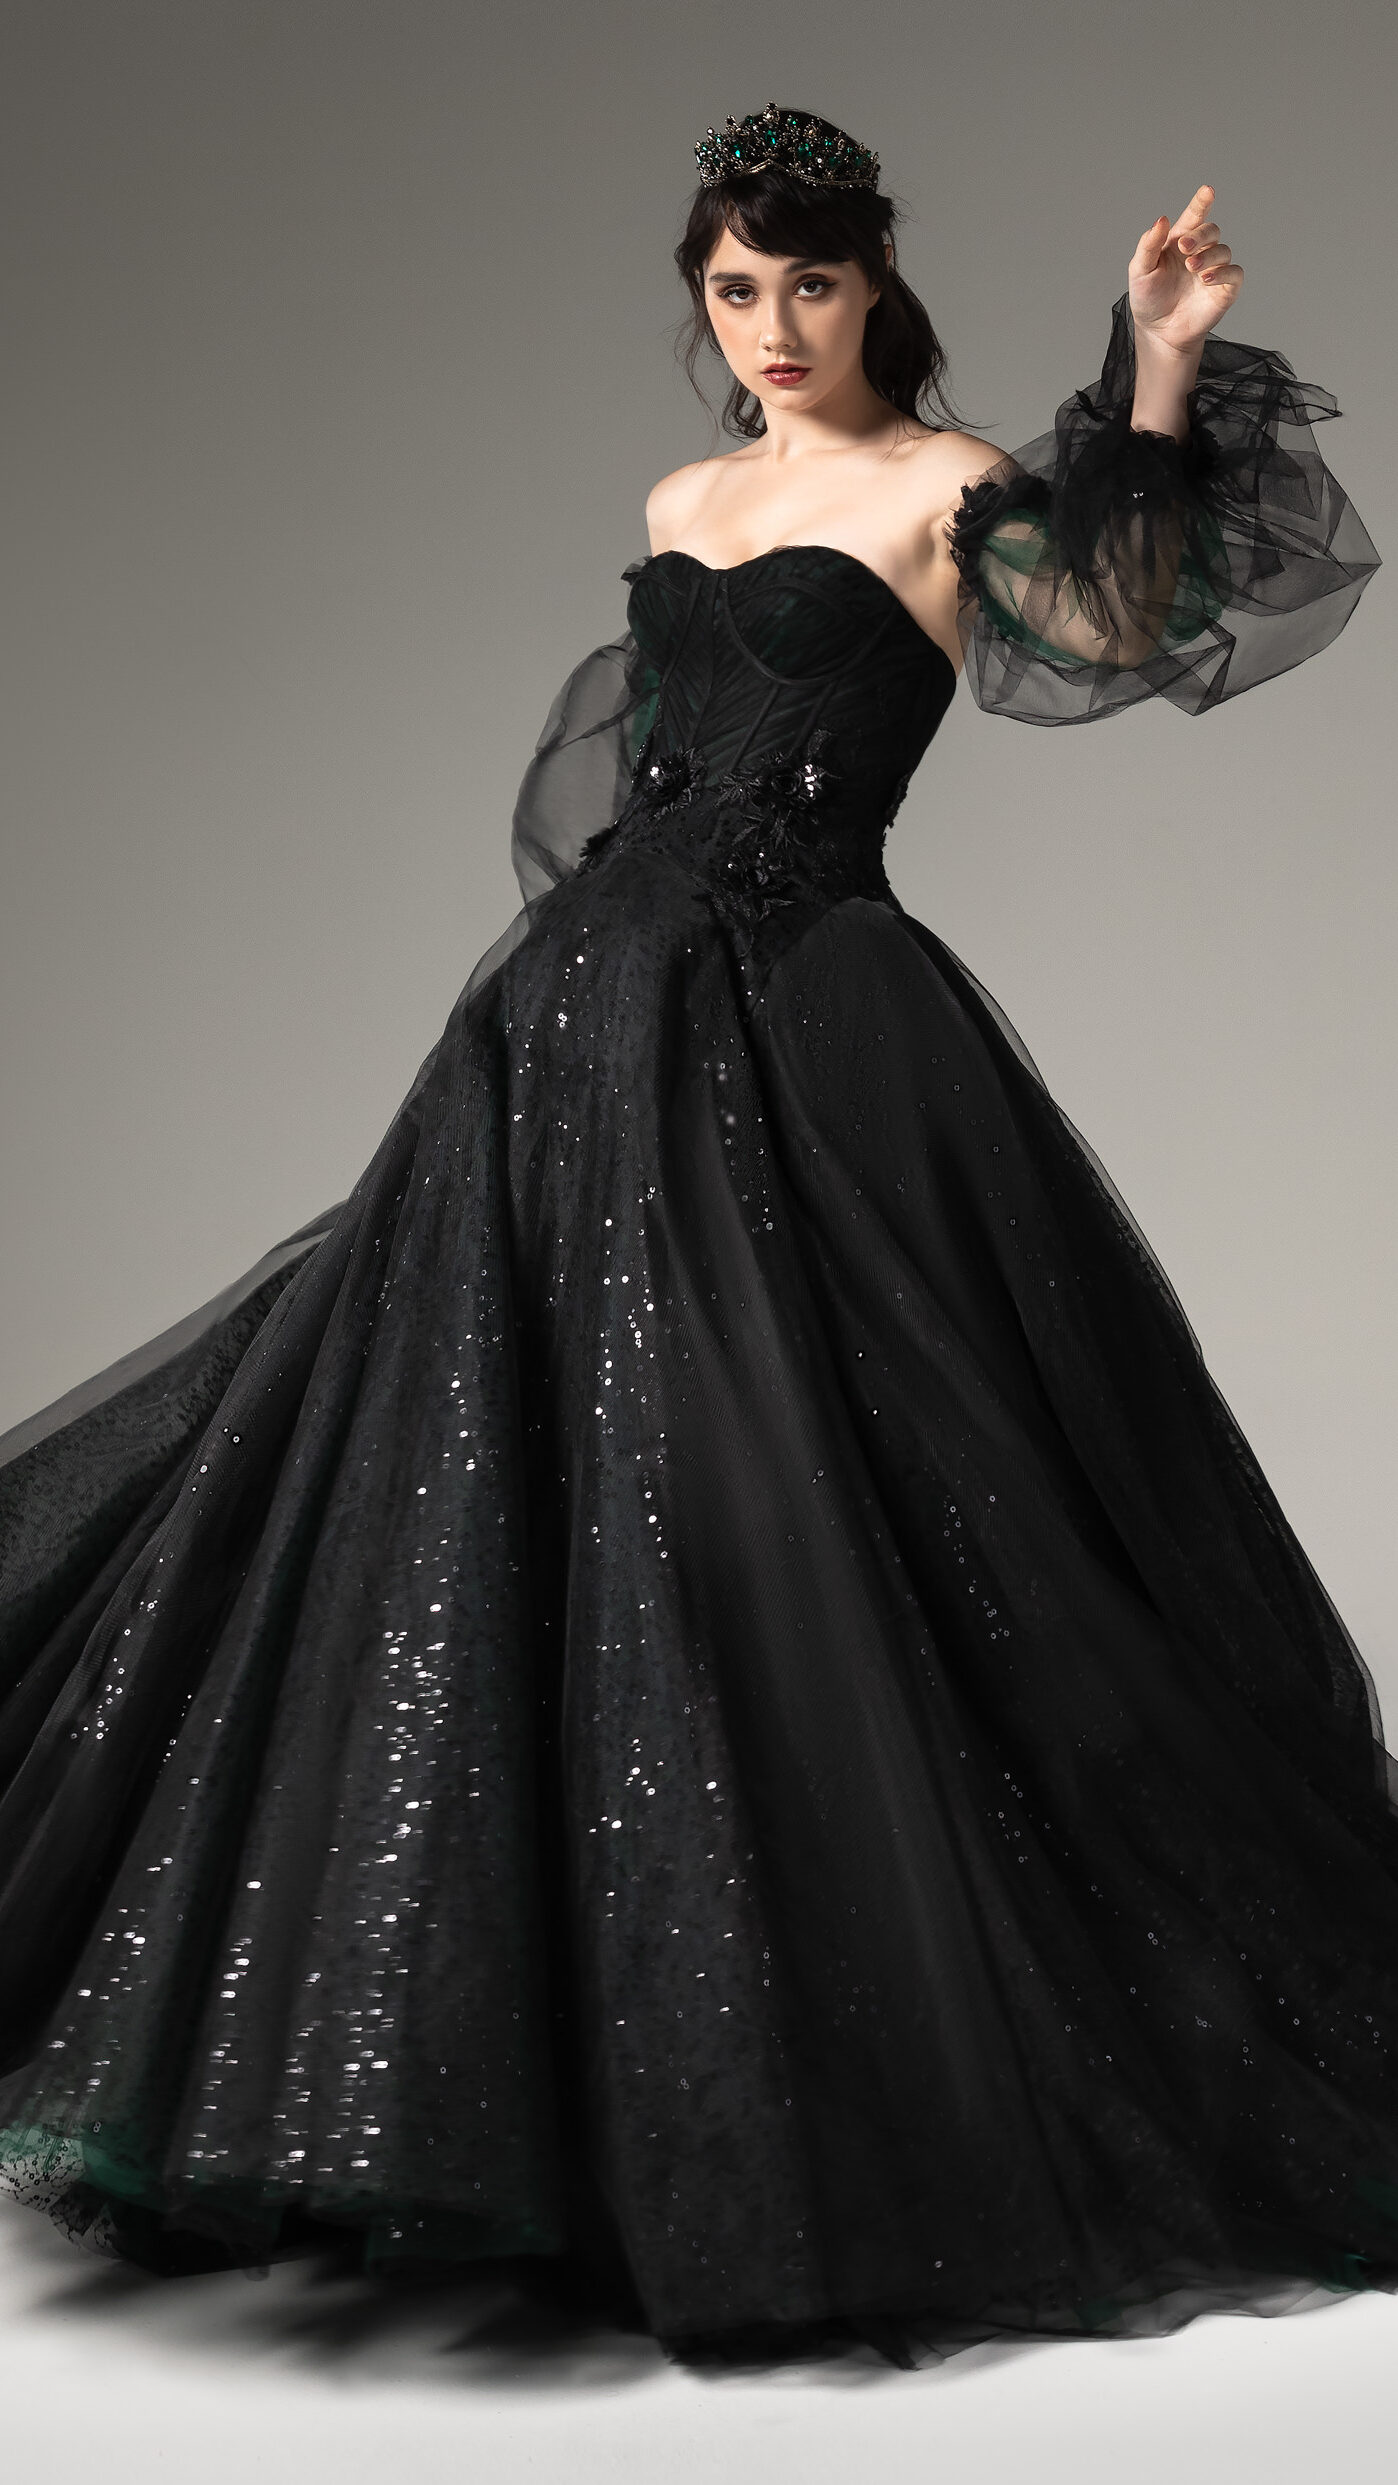 Black Wedding Dresses by Cocomelody 2022 -CW2506 | COLETTE